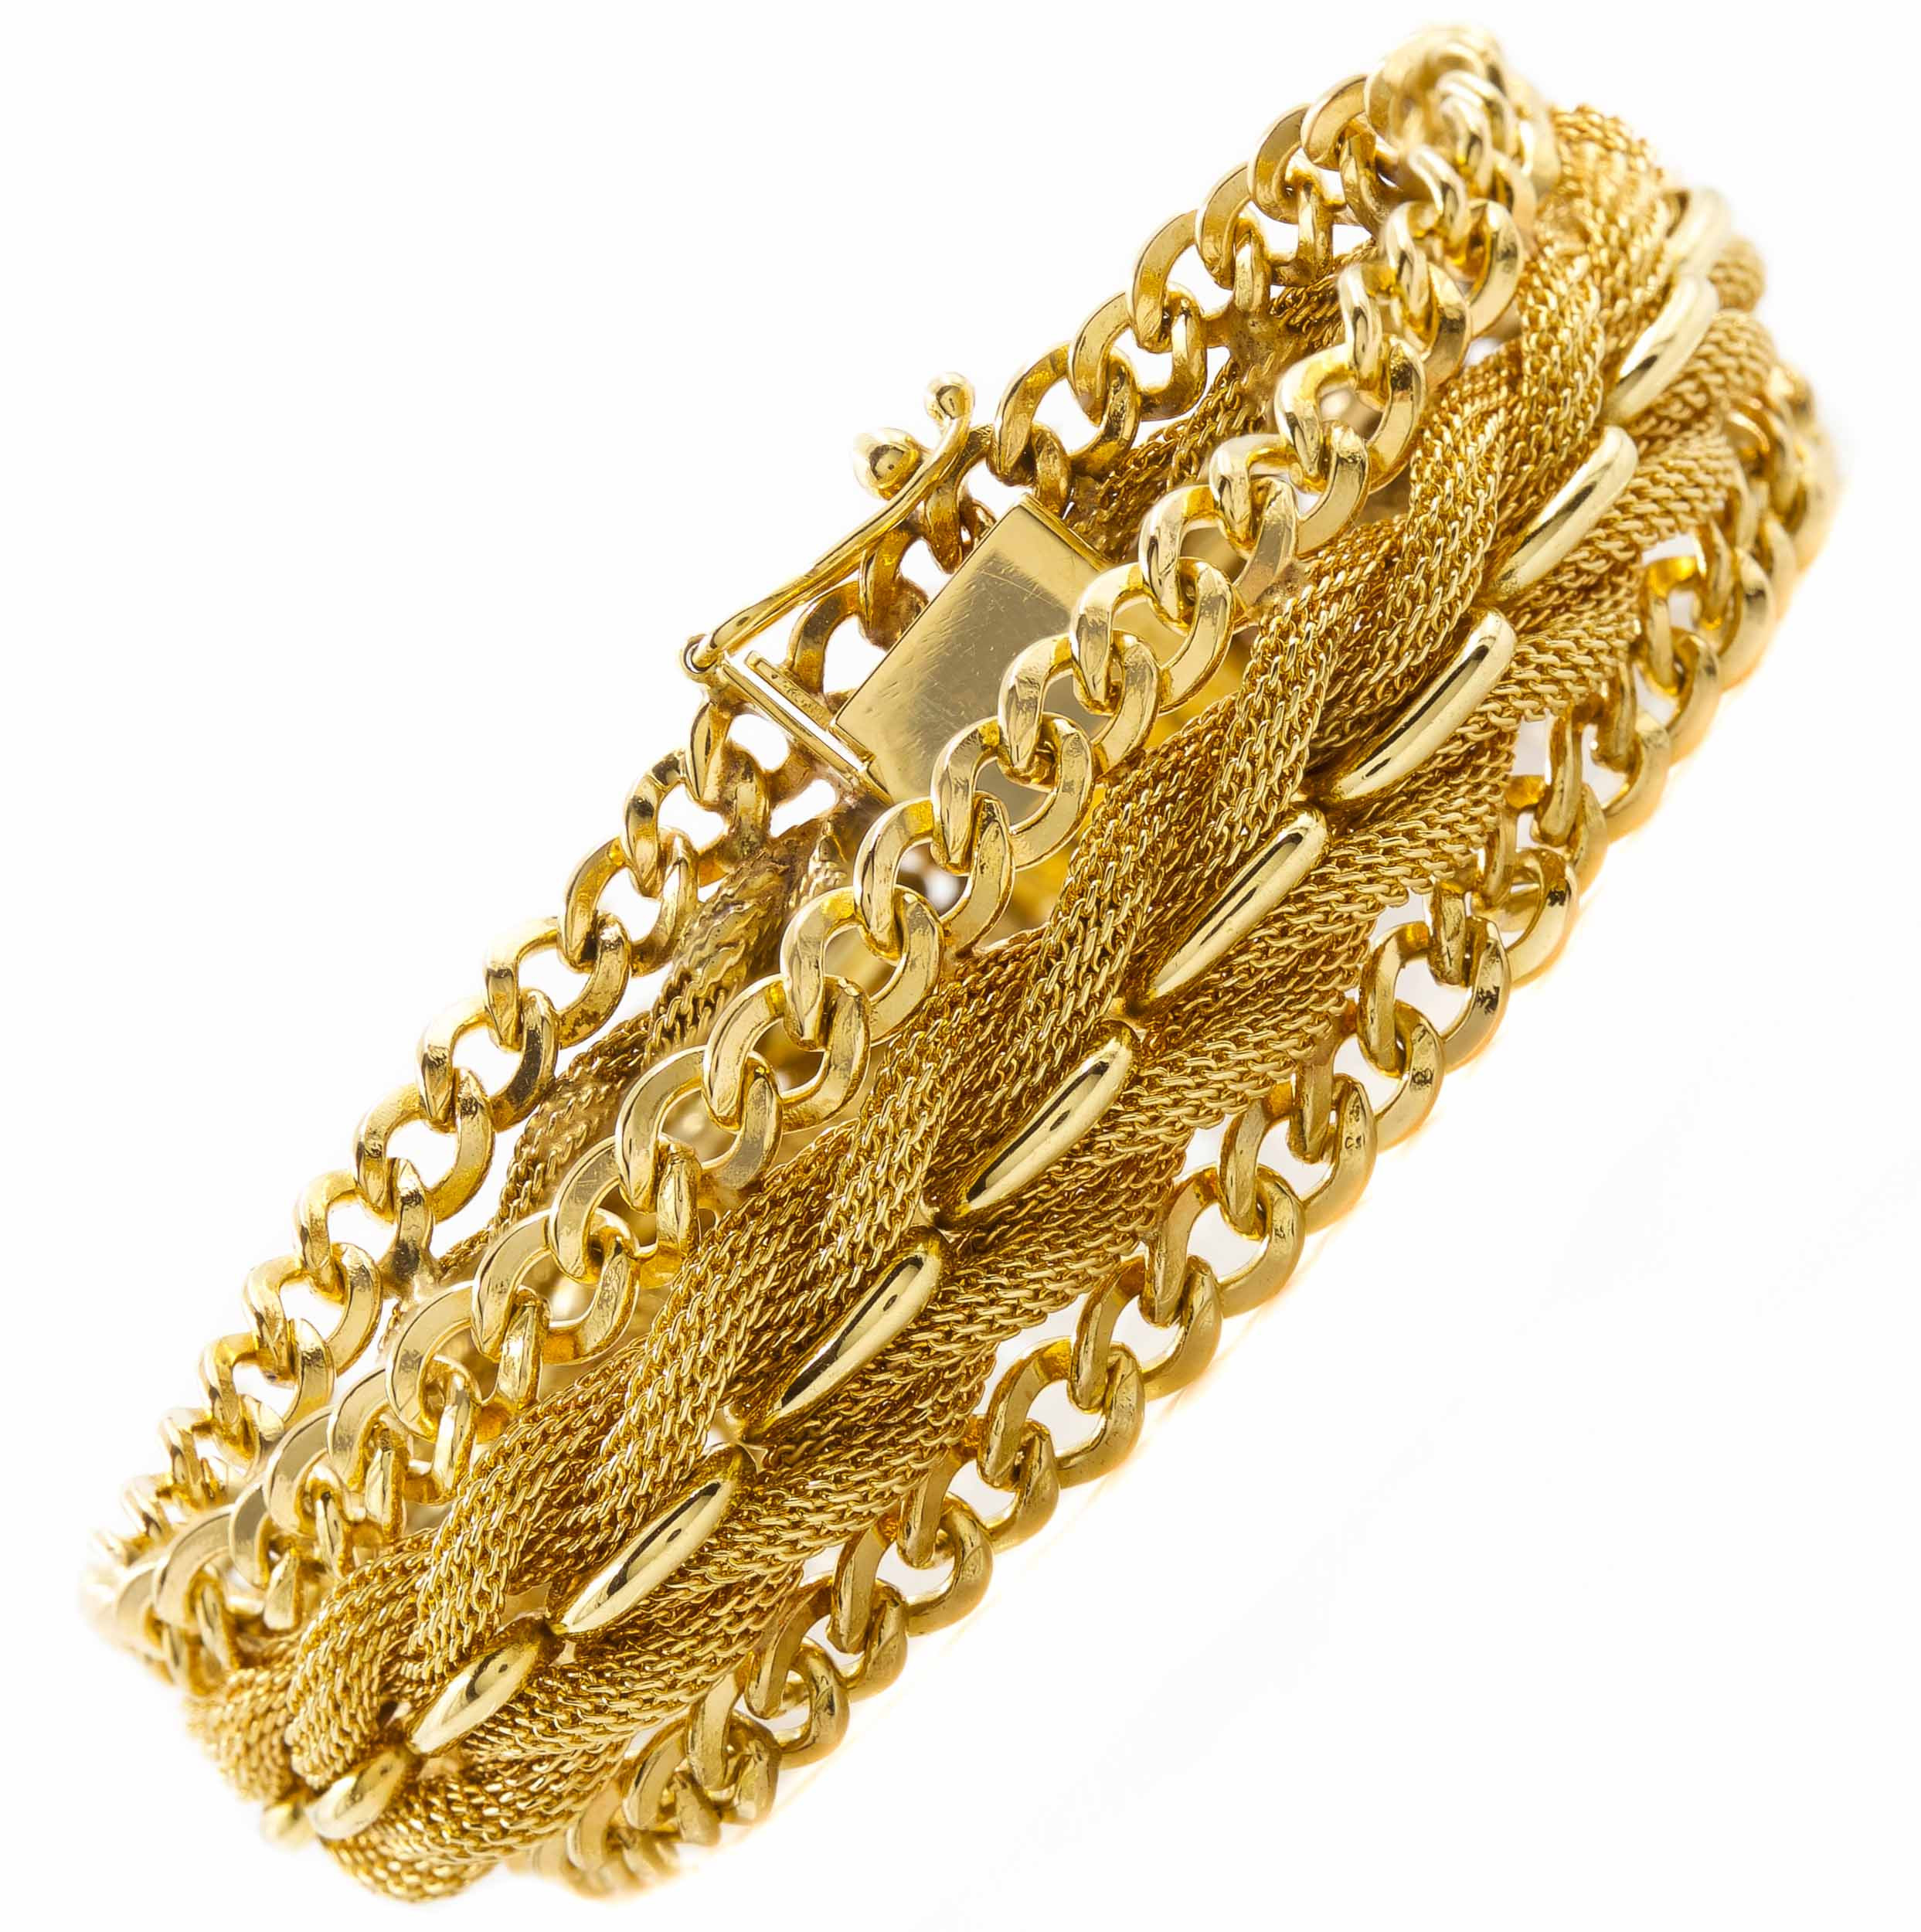 14K Gold] 6mm Open Bangle Bracelet/ Barrel *Made-to-order*TRDSP – Maxi  Hawaiian Jewelry マキシ ハワイアンジュエリー ハワイ本店